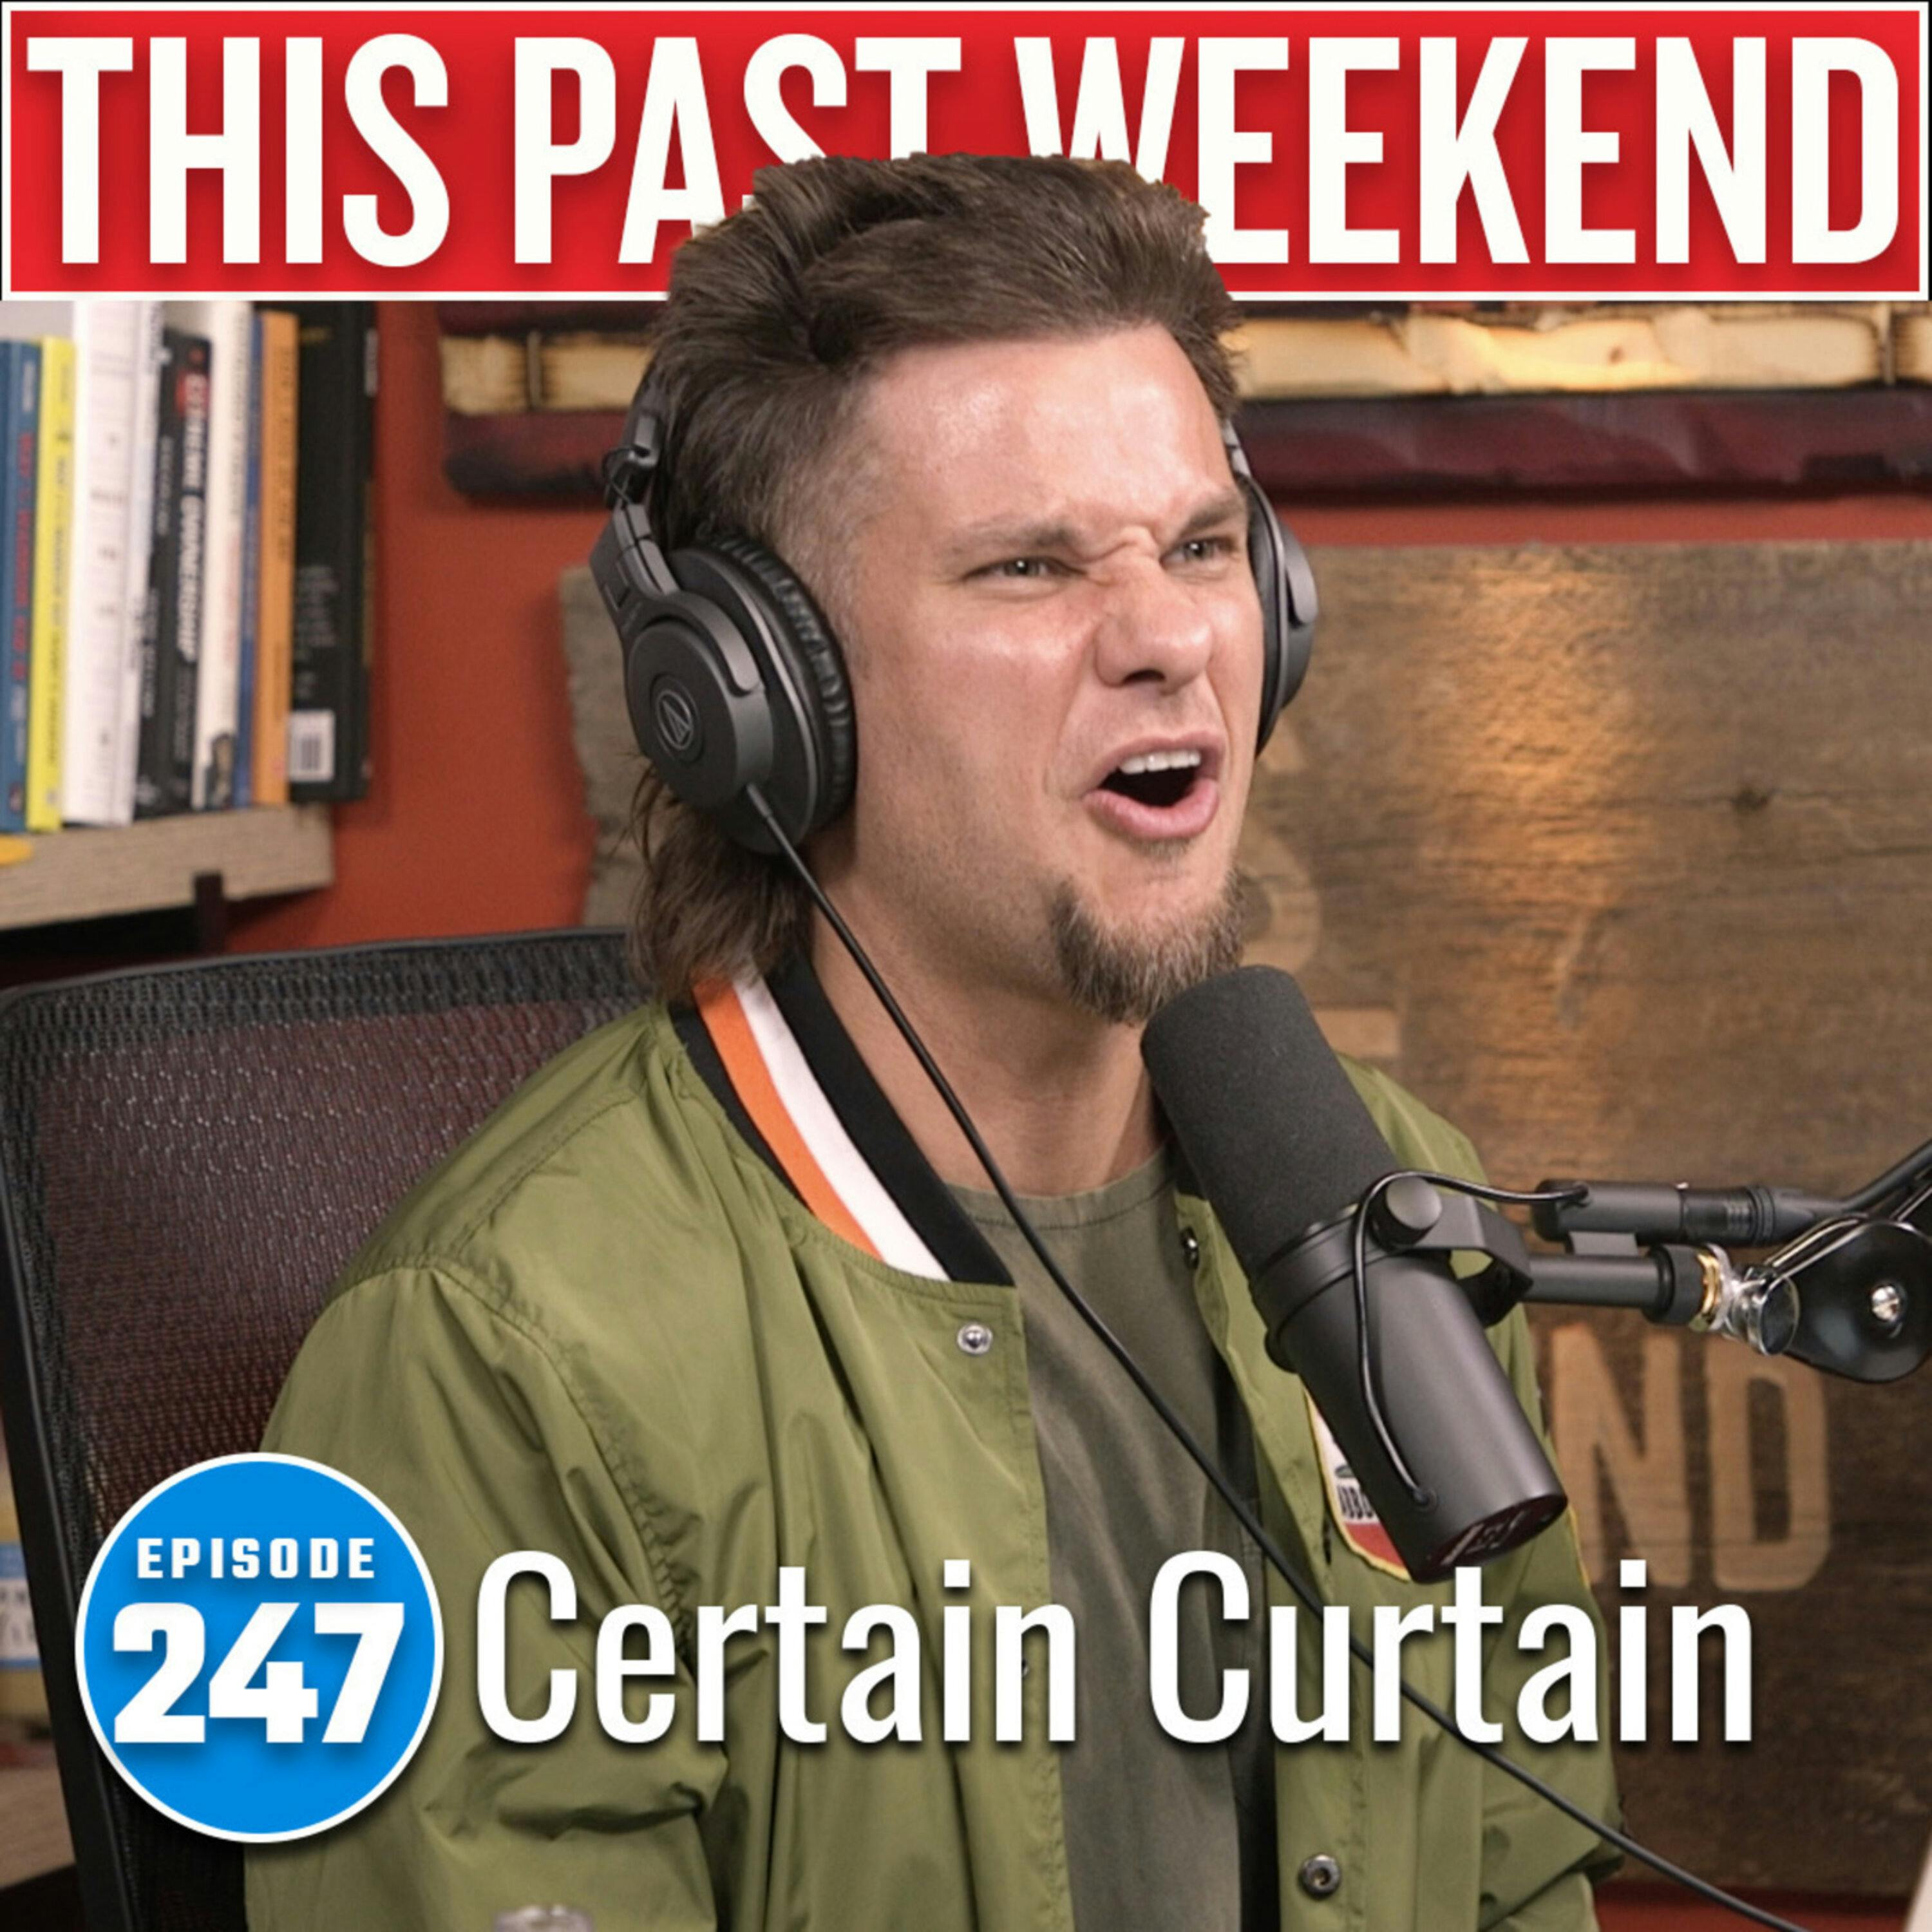 Certain Curtain | This Past Weekend #247 by Theo Von